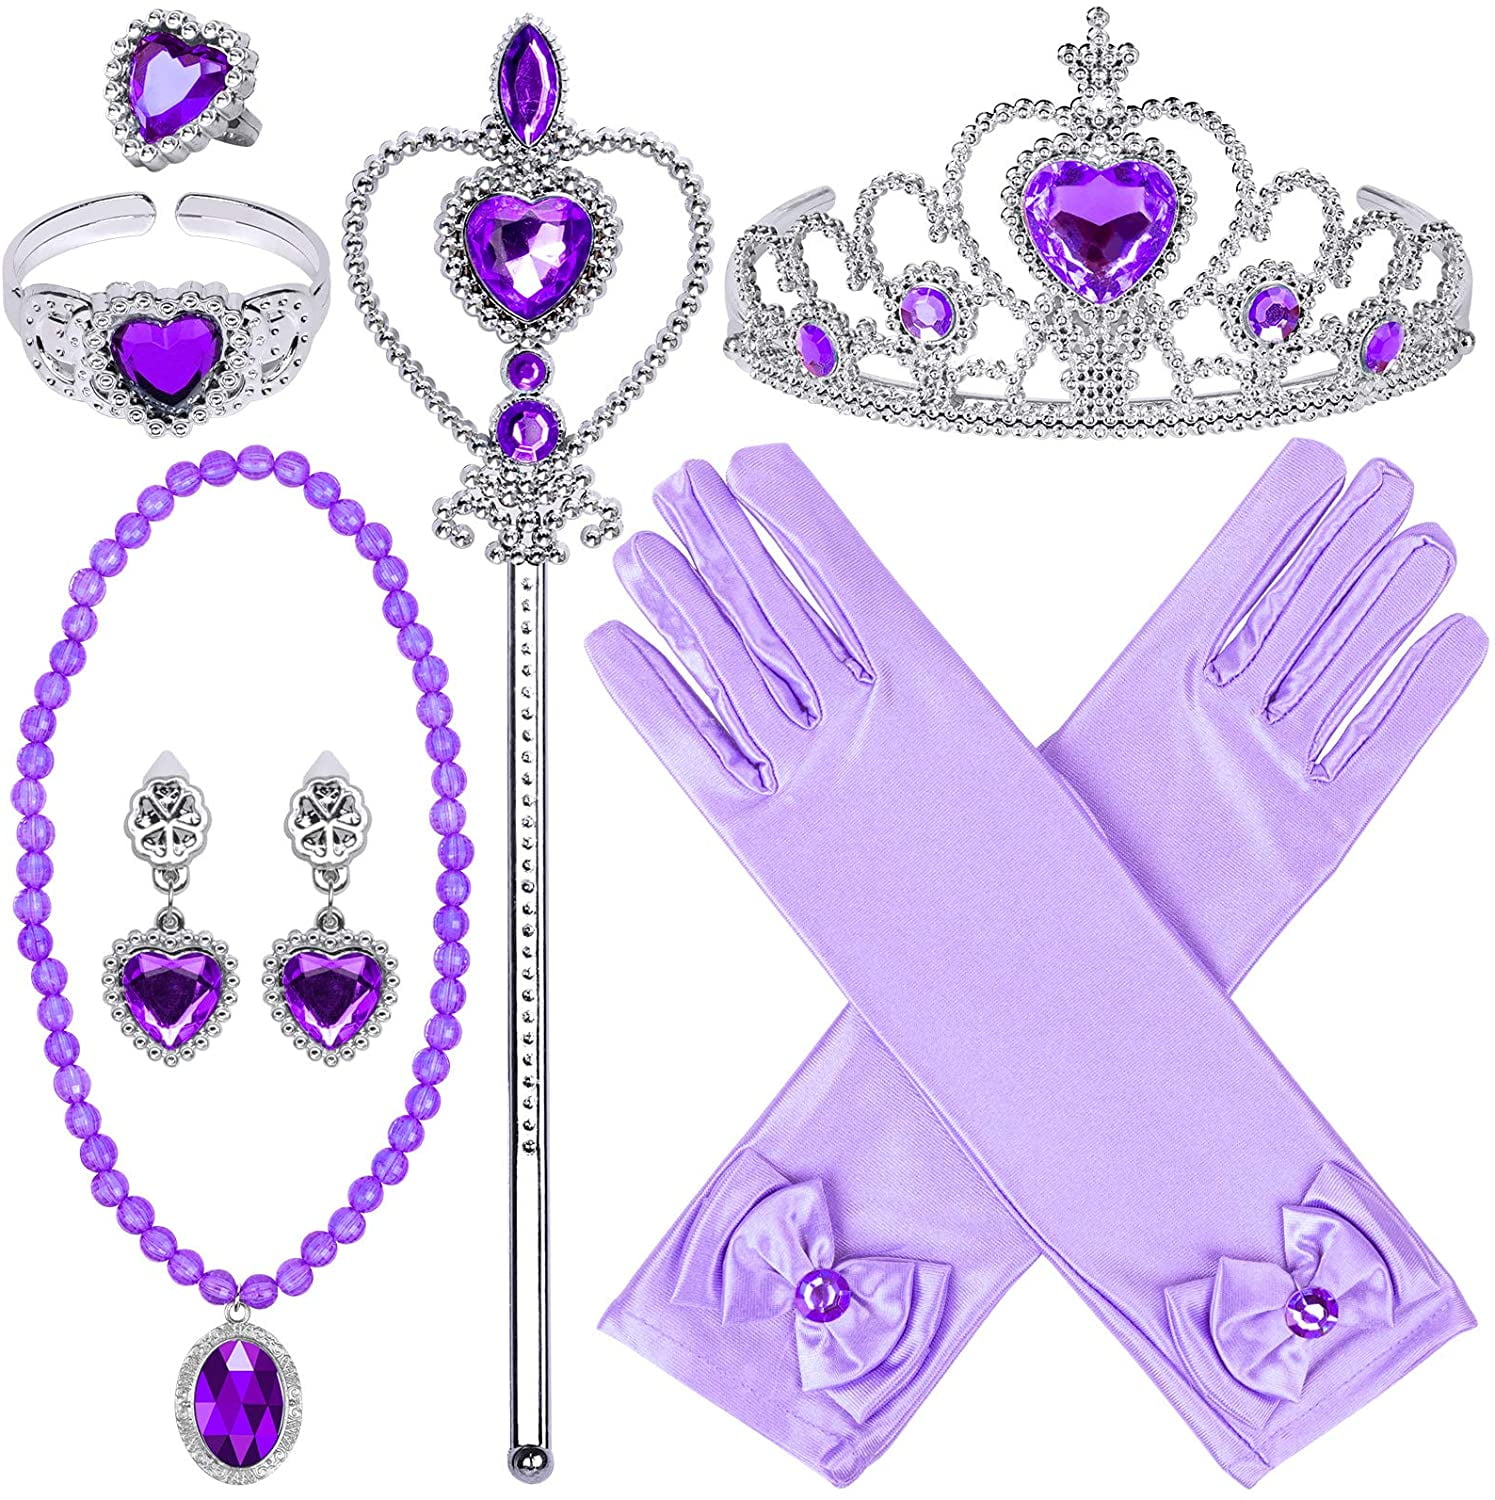 Details about   Princess Dress Up Party Accessories for Princess Costume Gloves Tiara Wand Ne...